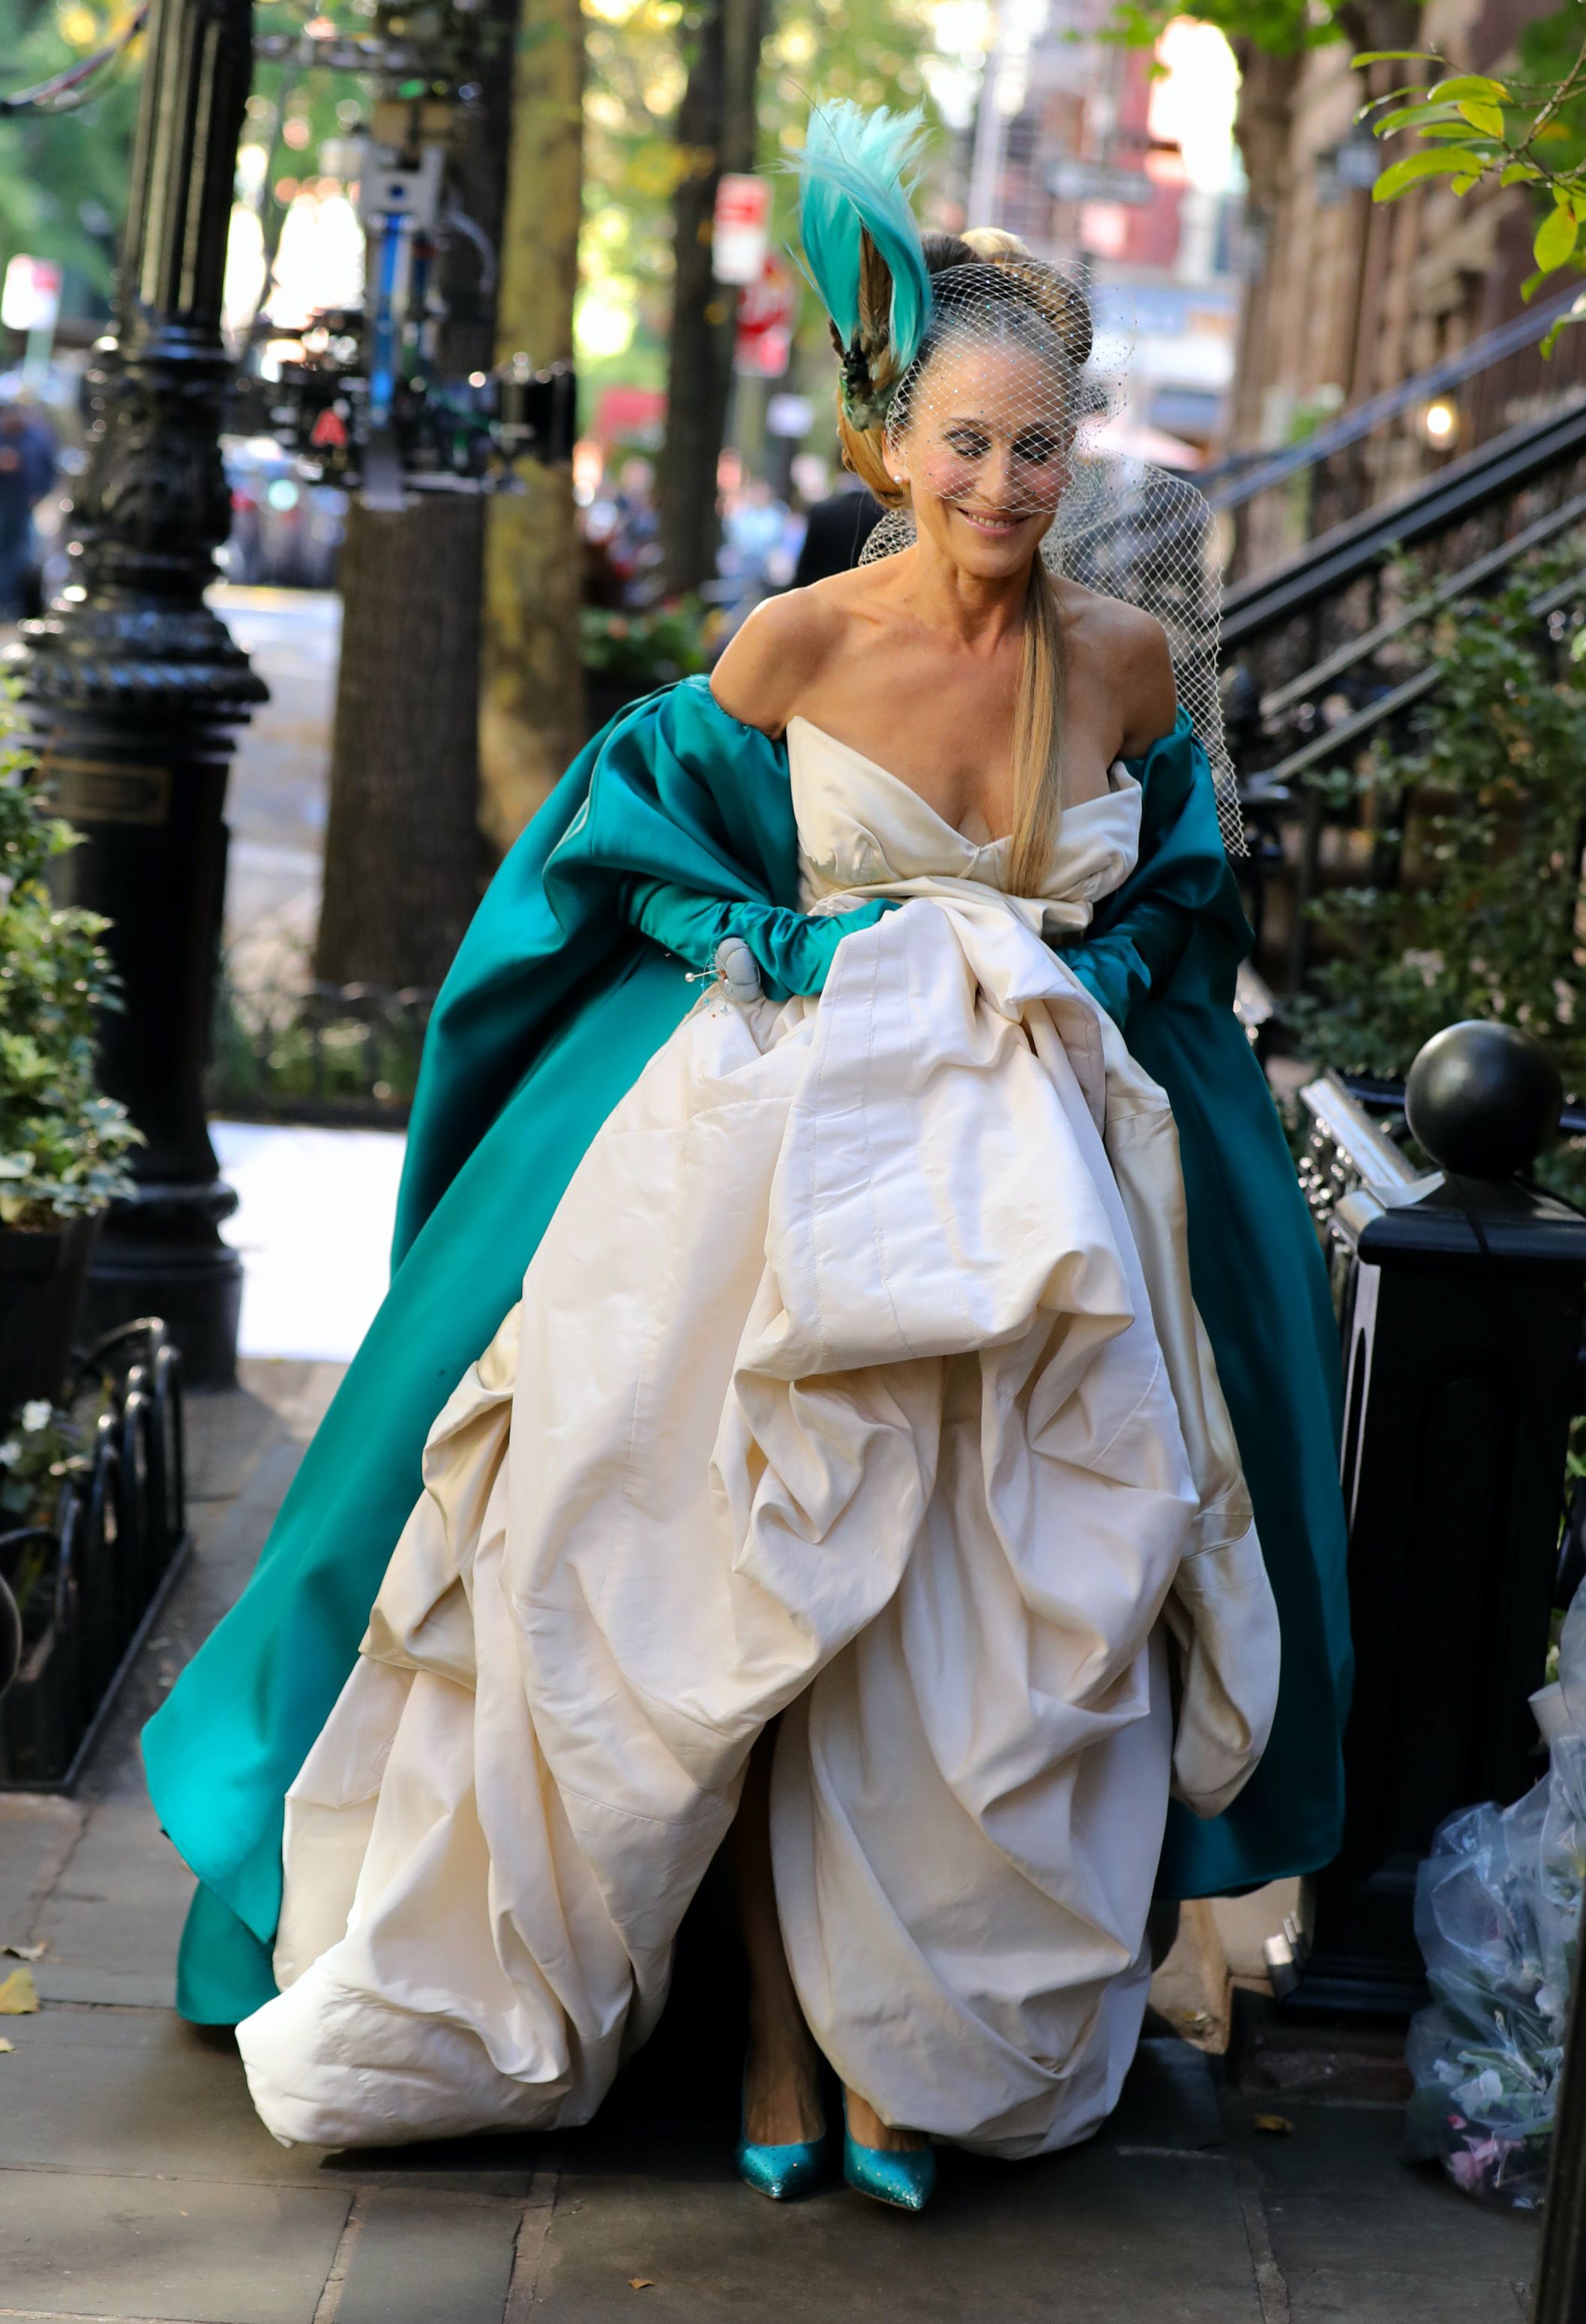 https://hips.hearstapps.com/hmg-prod/images/sarah-jessica-parker-is-seen-on-the-set-of-and-just-like-news-photo-1667503702.jpg